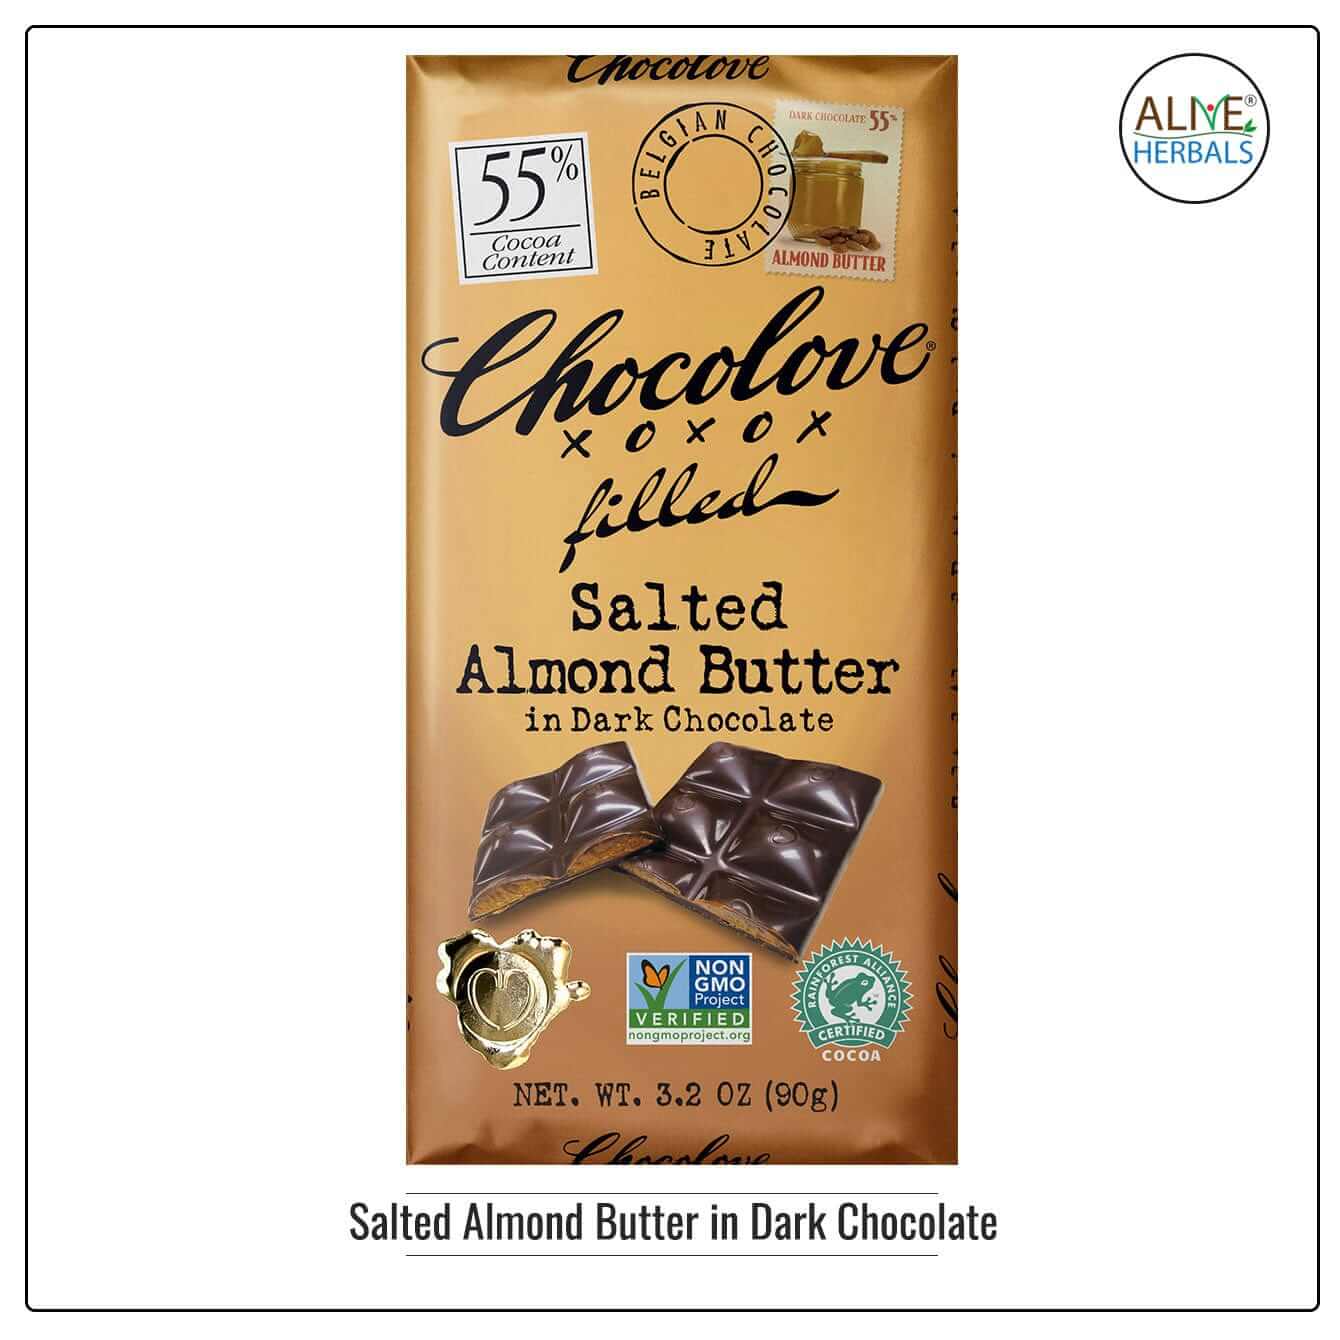 Salted Almond Butter in Dark Chocolate - Buy at Natural Food Store | Alive Herbals.